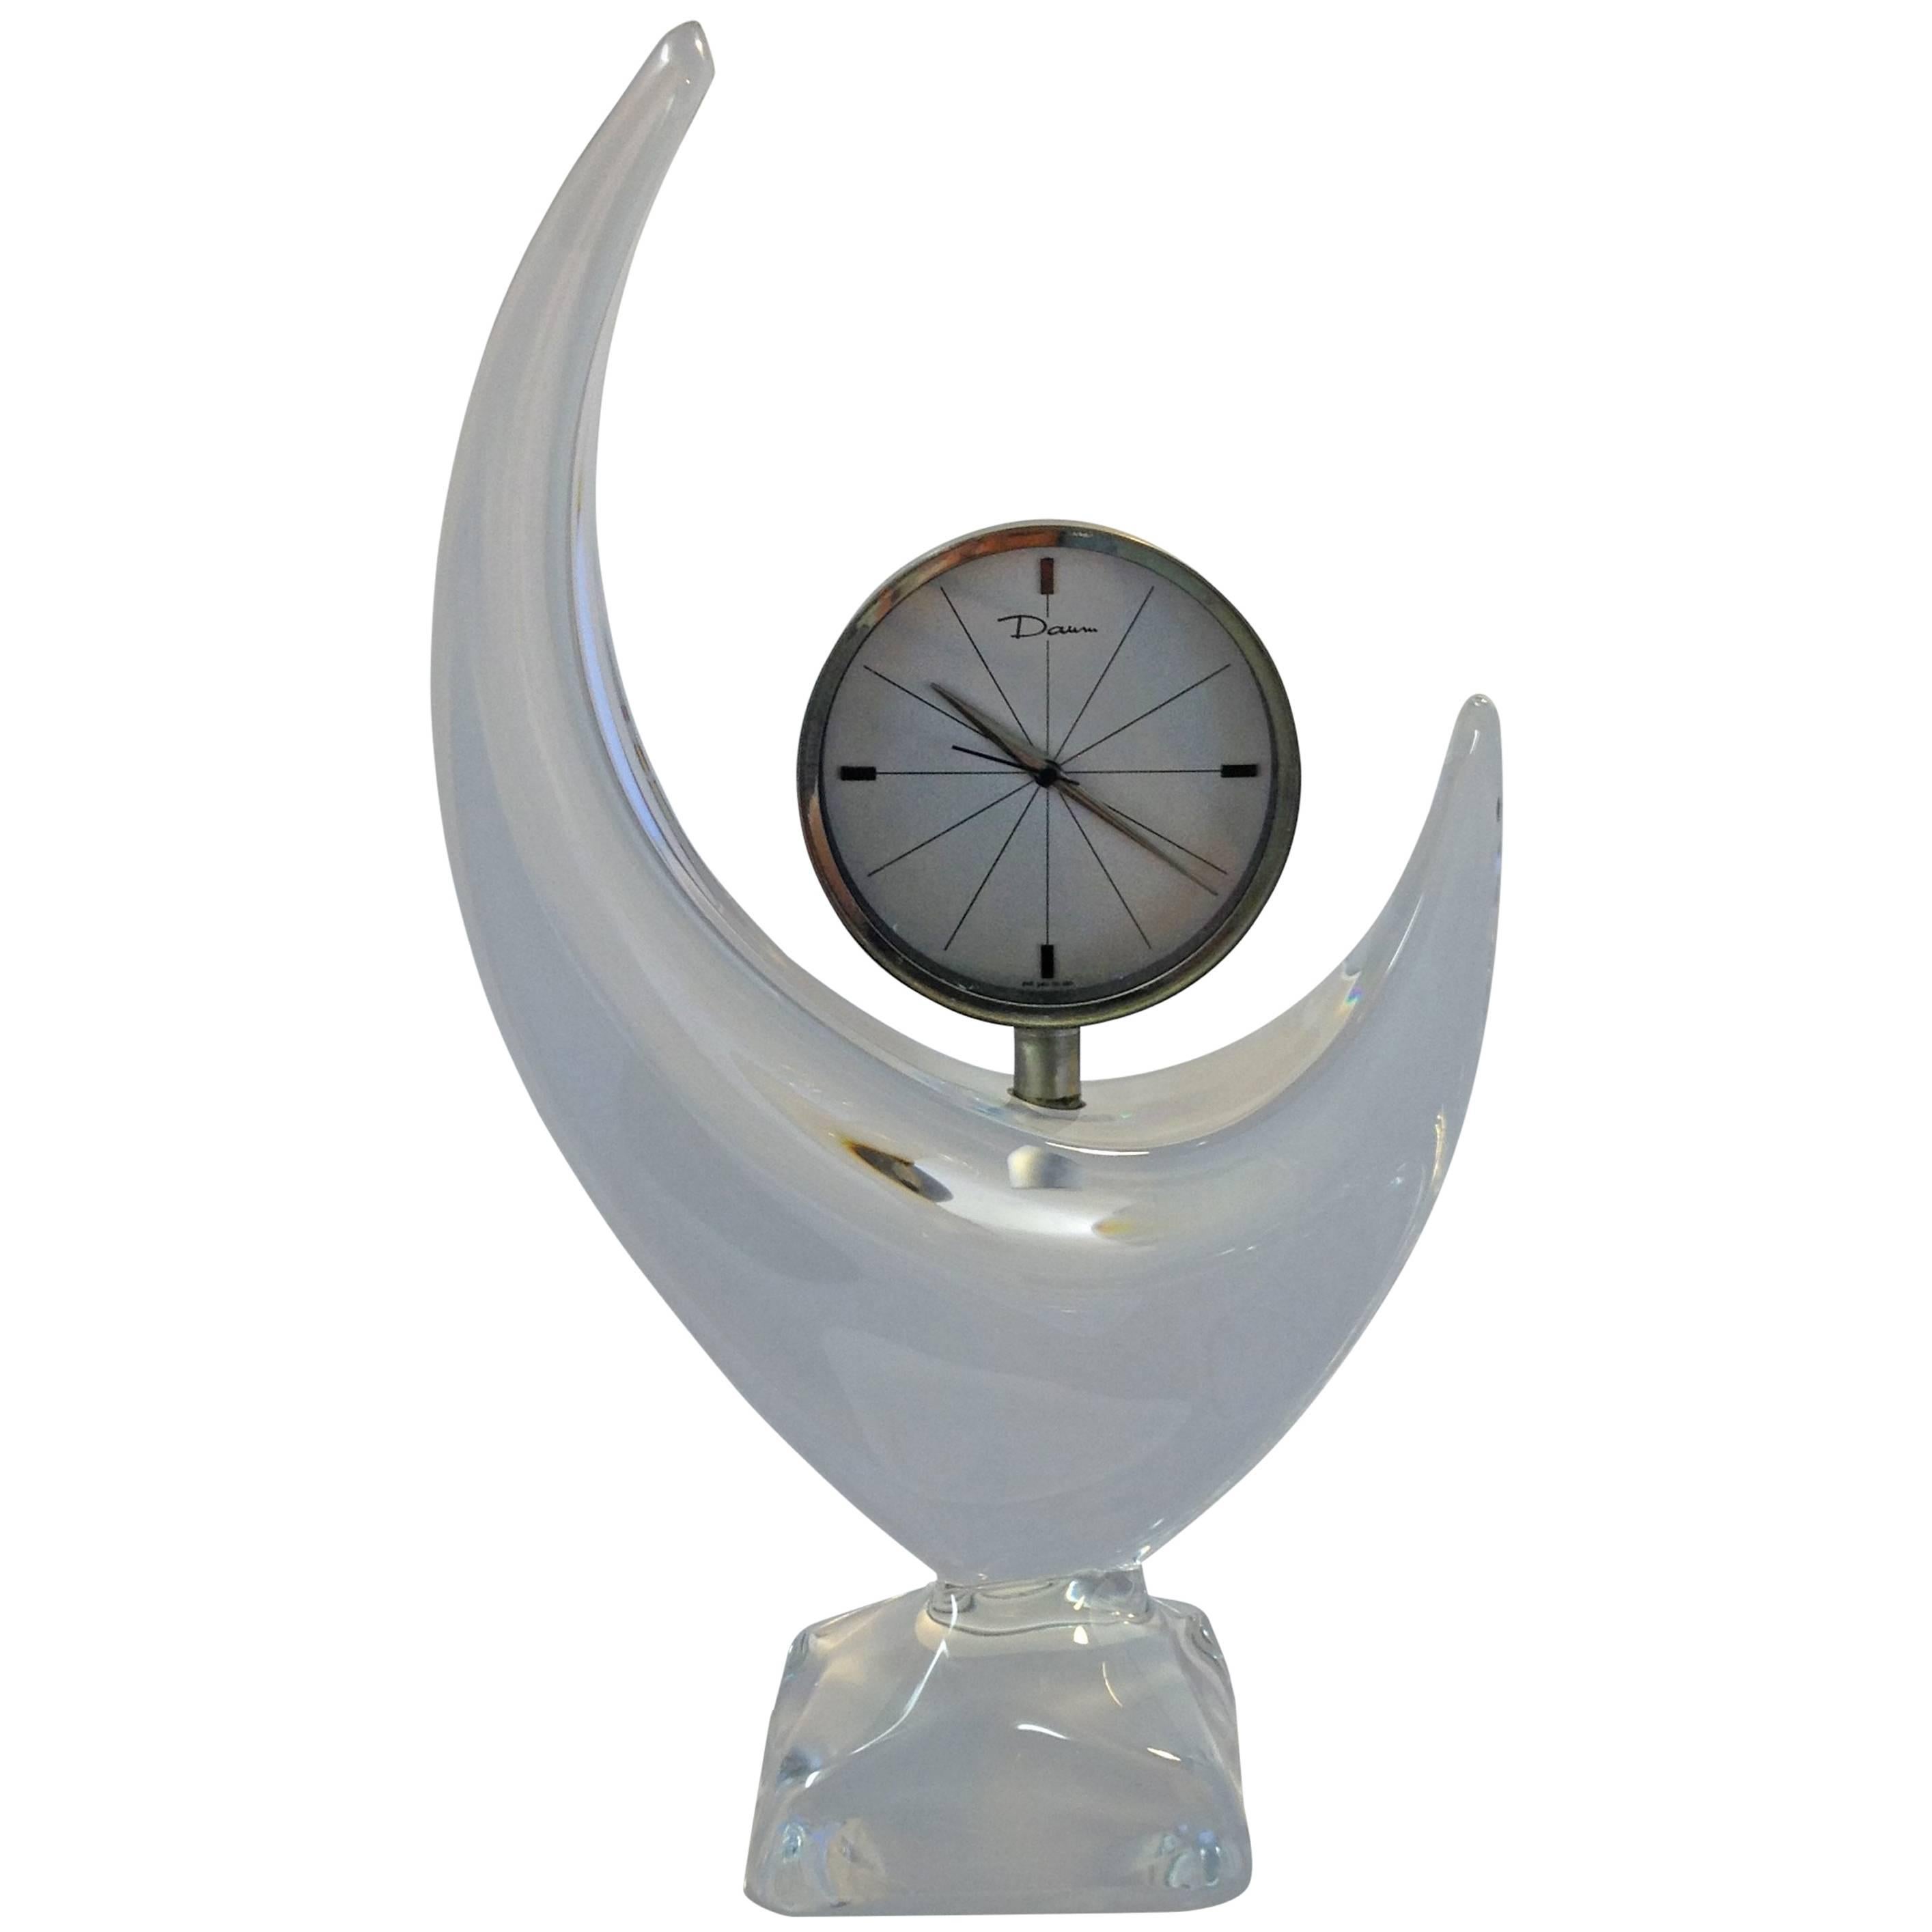 Mid-Century Crescent Moon Shaped Crystal Clock by Daum